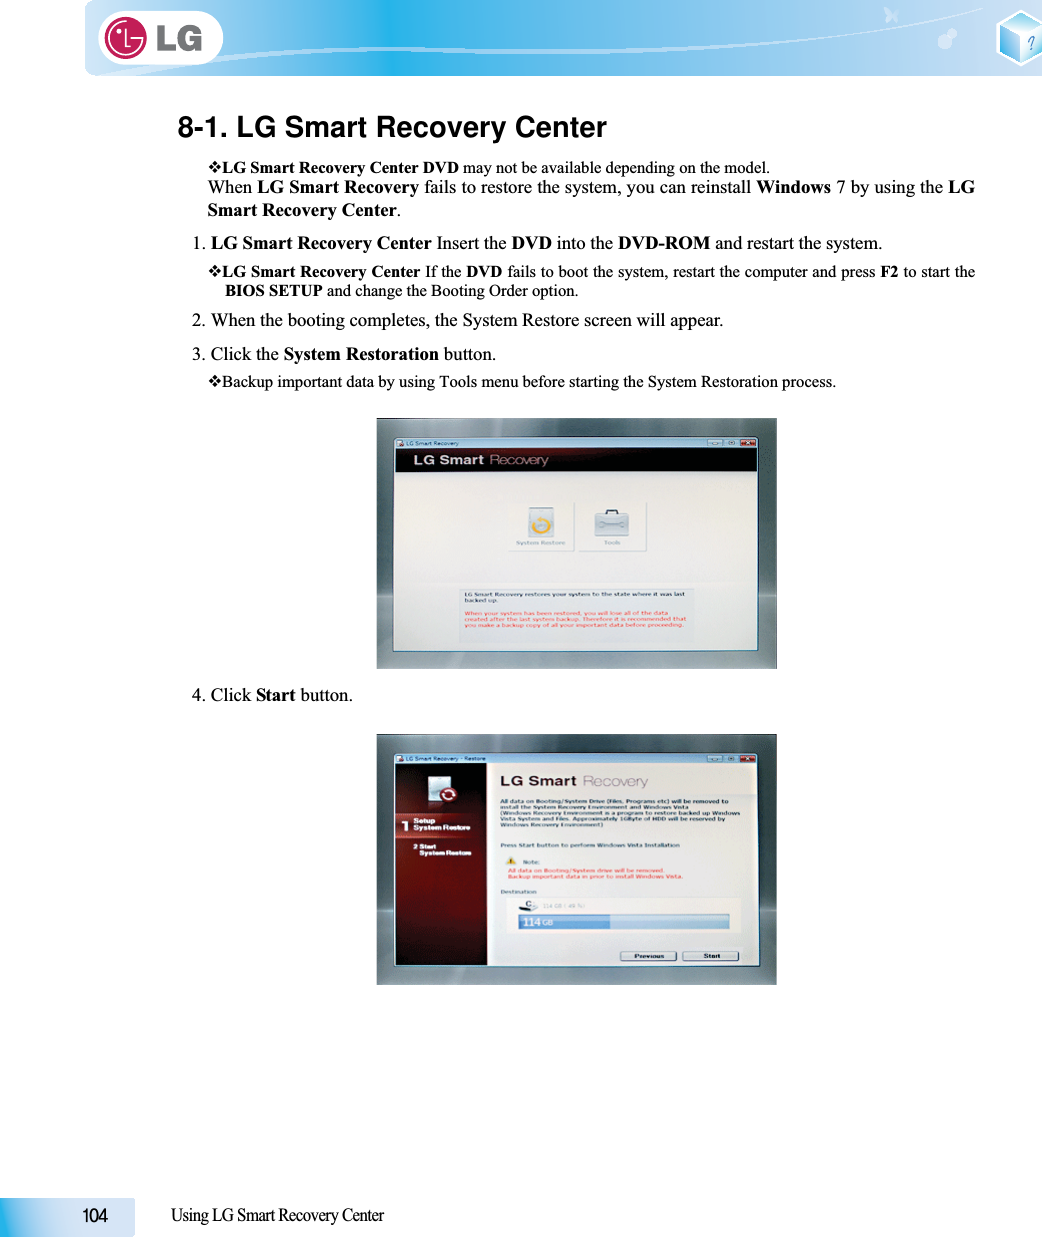 Using LG Smart Recovery Center8-1. LG Smart Recovery CenterLG Smart Recovery Center DVD may not be available depending on the model.When LG Smart Recovery fails to restore the system, you can reinstall Windows 7 by using the LGSmart Recovery Center.1. LG Smart Recovery Center Insert the DVD into the DVD-ROM and restart the system.LG Smart Recovery Center If the DVD fails to boot the system, restart the computer and press F2 to start theBIOS SETUP and change the Booting Order option. 2. When the booting completes, the System Restore screen will appear.3. Click the System Restoration button.Backup important data by using Tools menu before starting the System Restoration process.4. Click Start button.